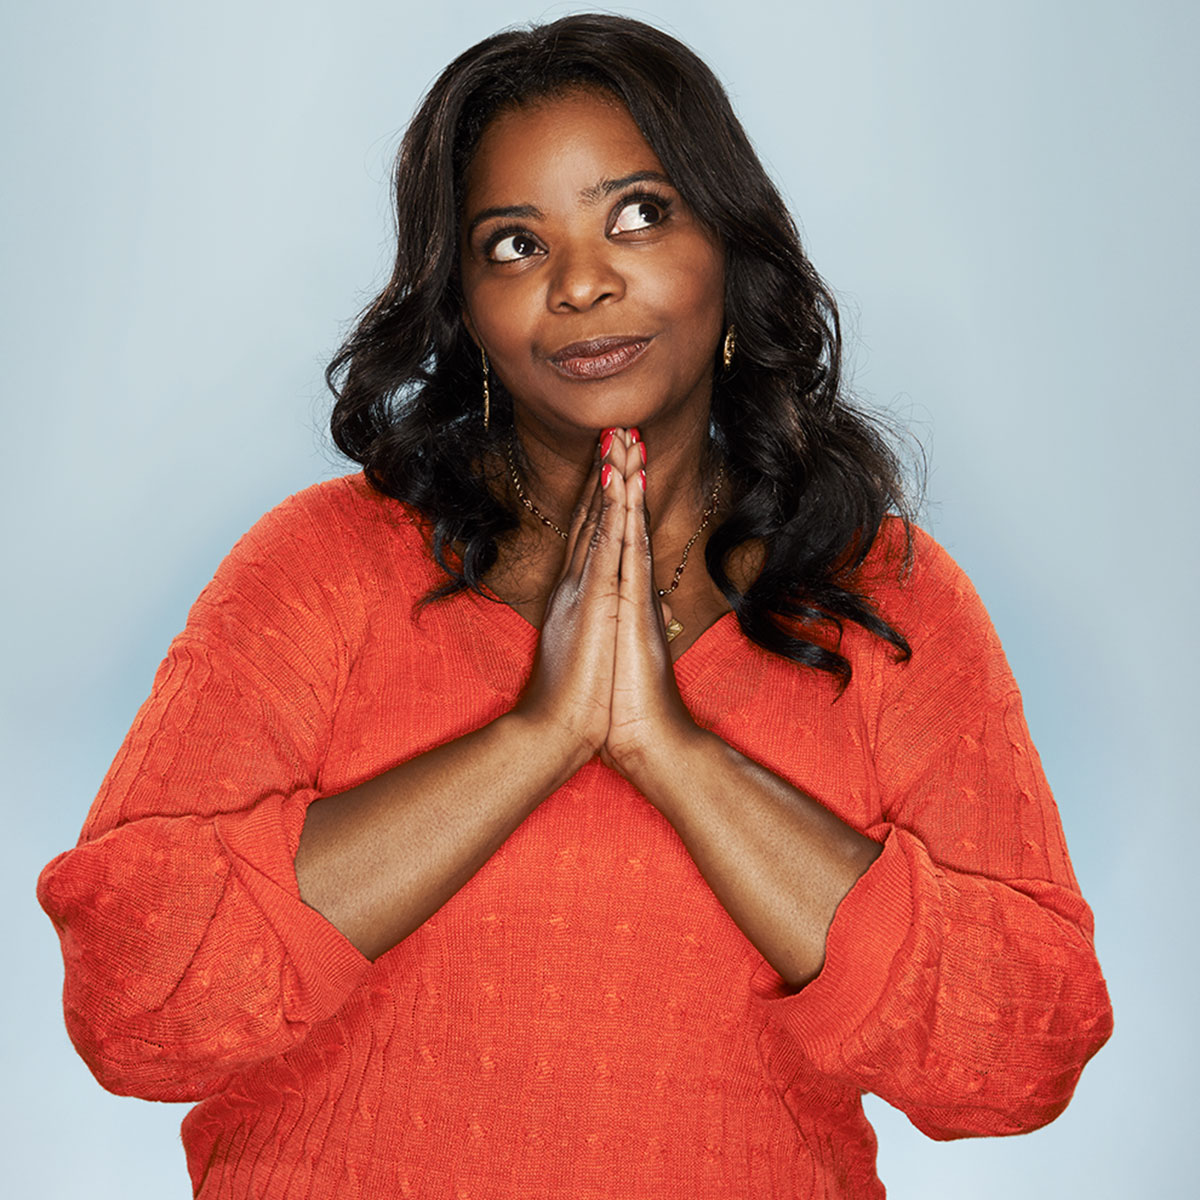 Entertainment Weekly feature on Sundance: Octavia Spencer shot by Christopher Beyer